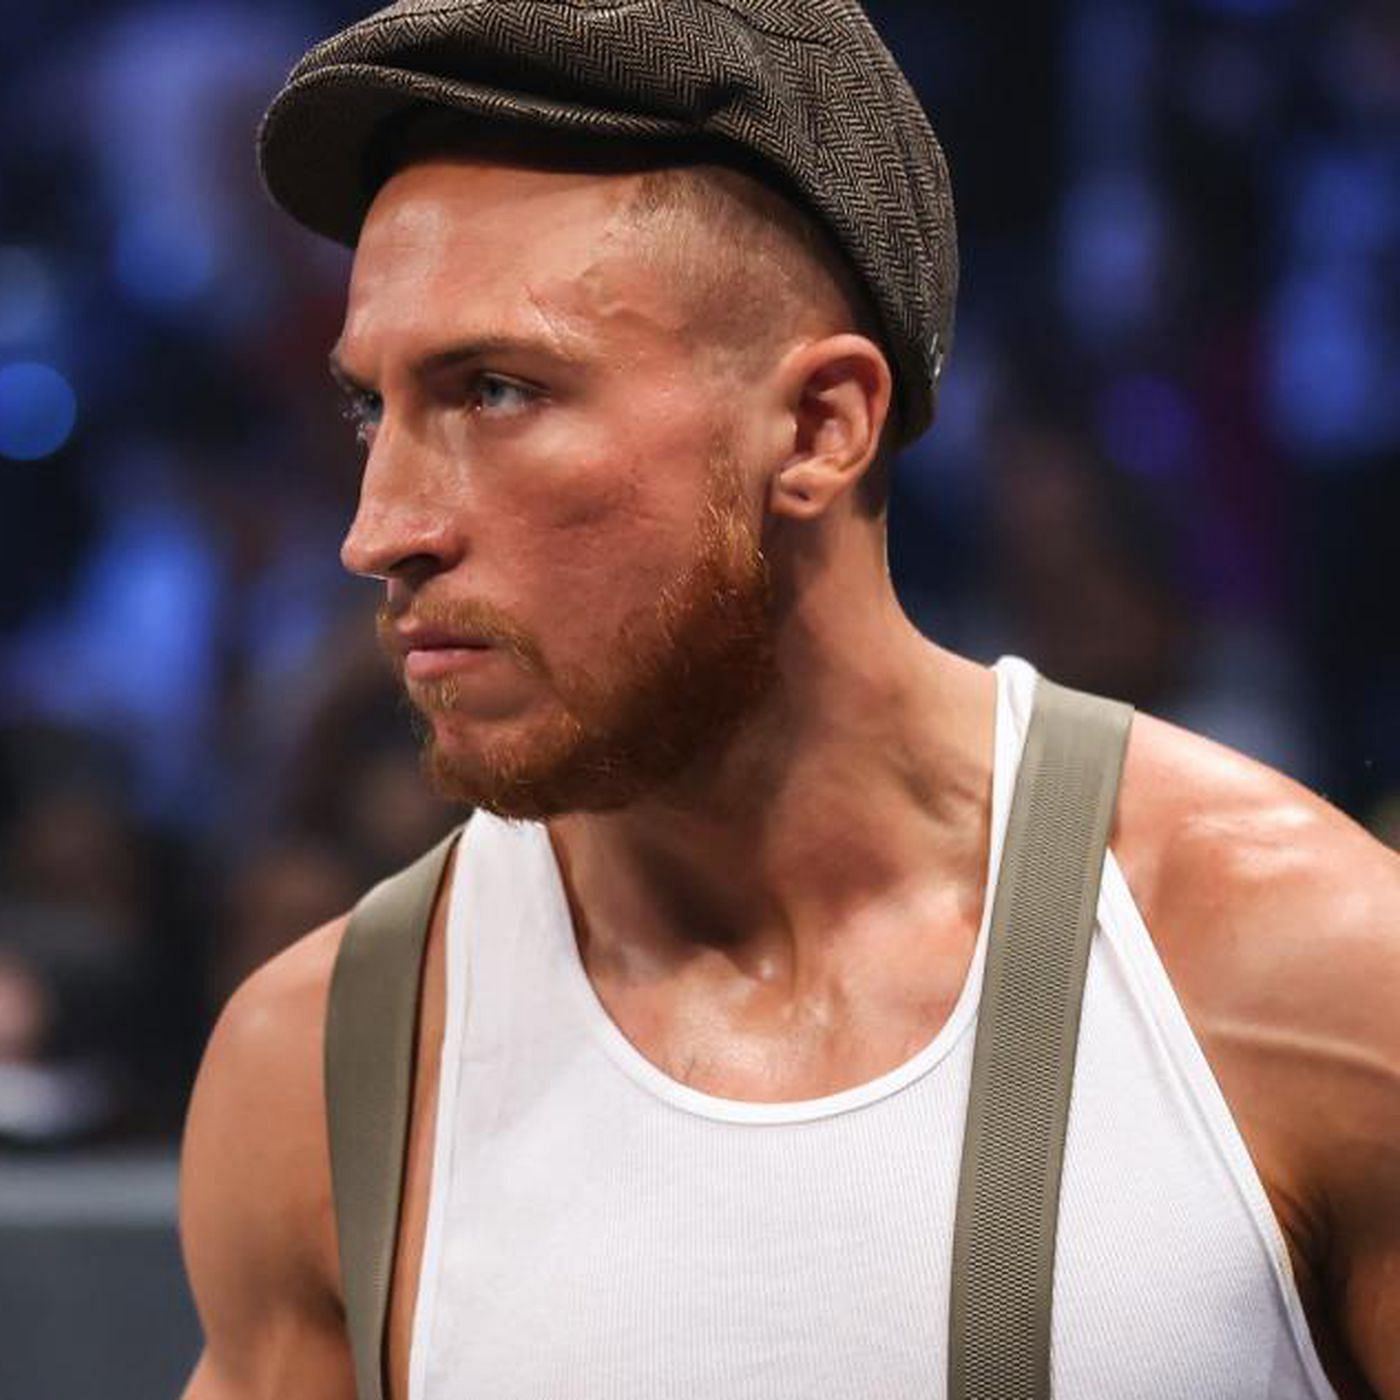 Dunne has been called up to the main roster, where he competes as Butch